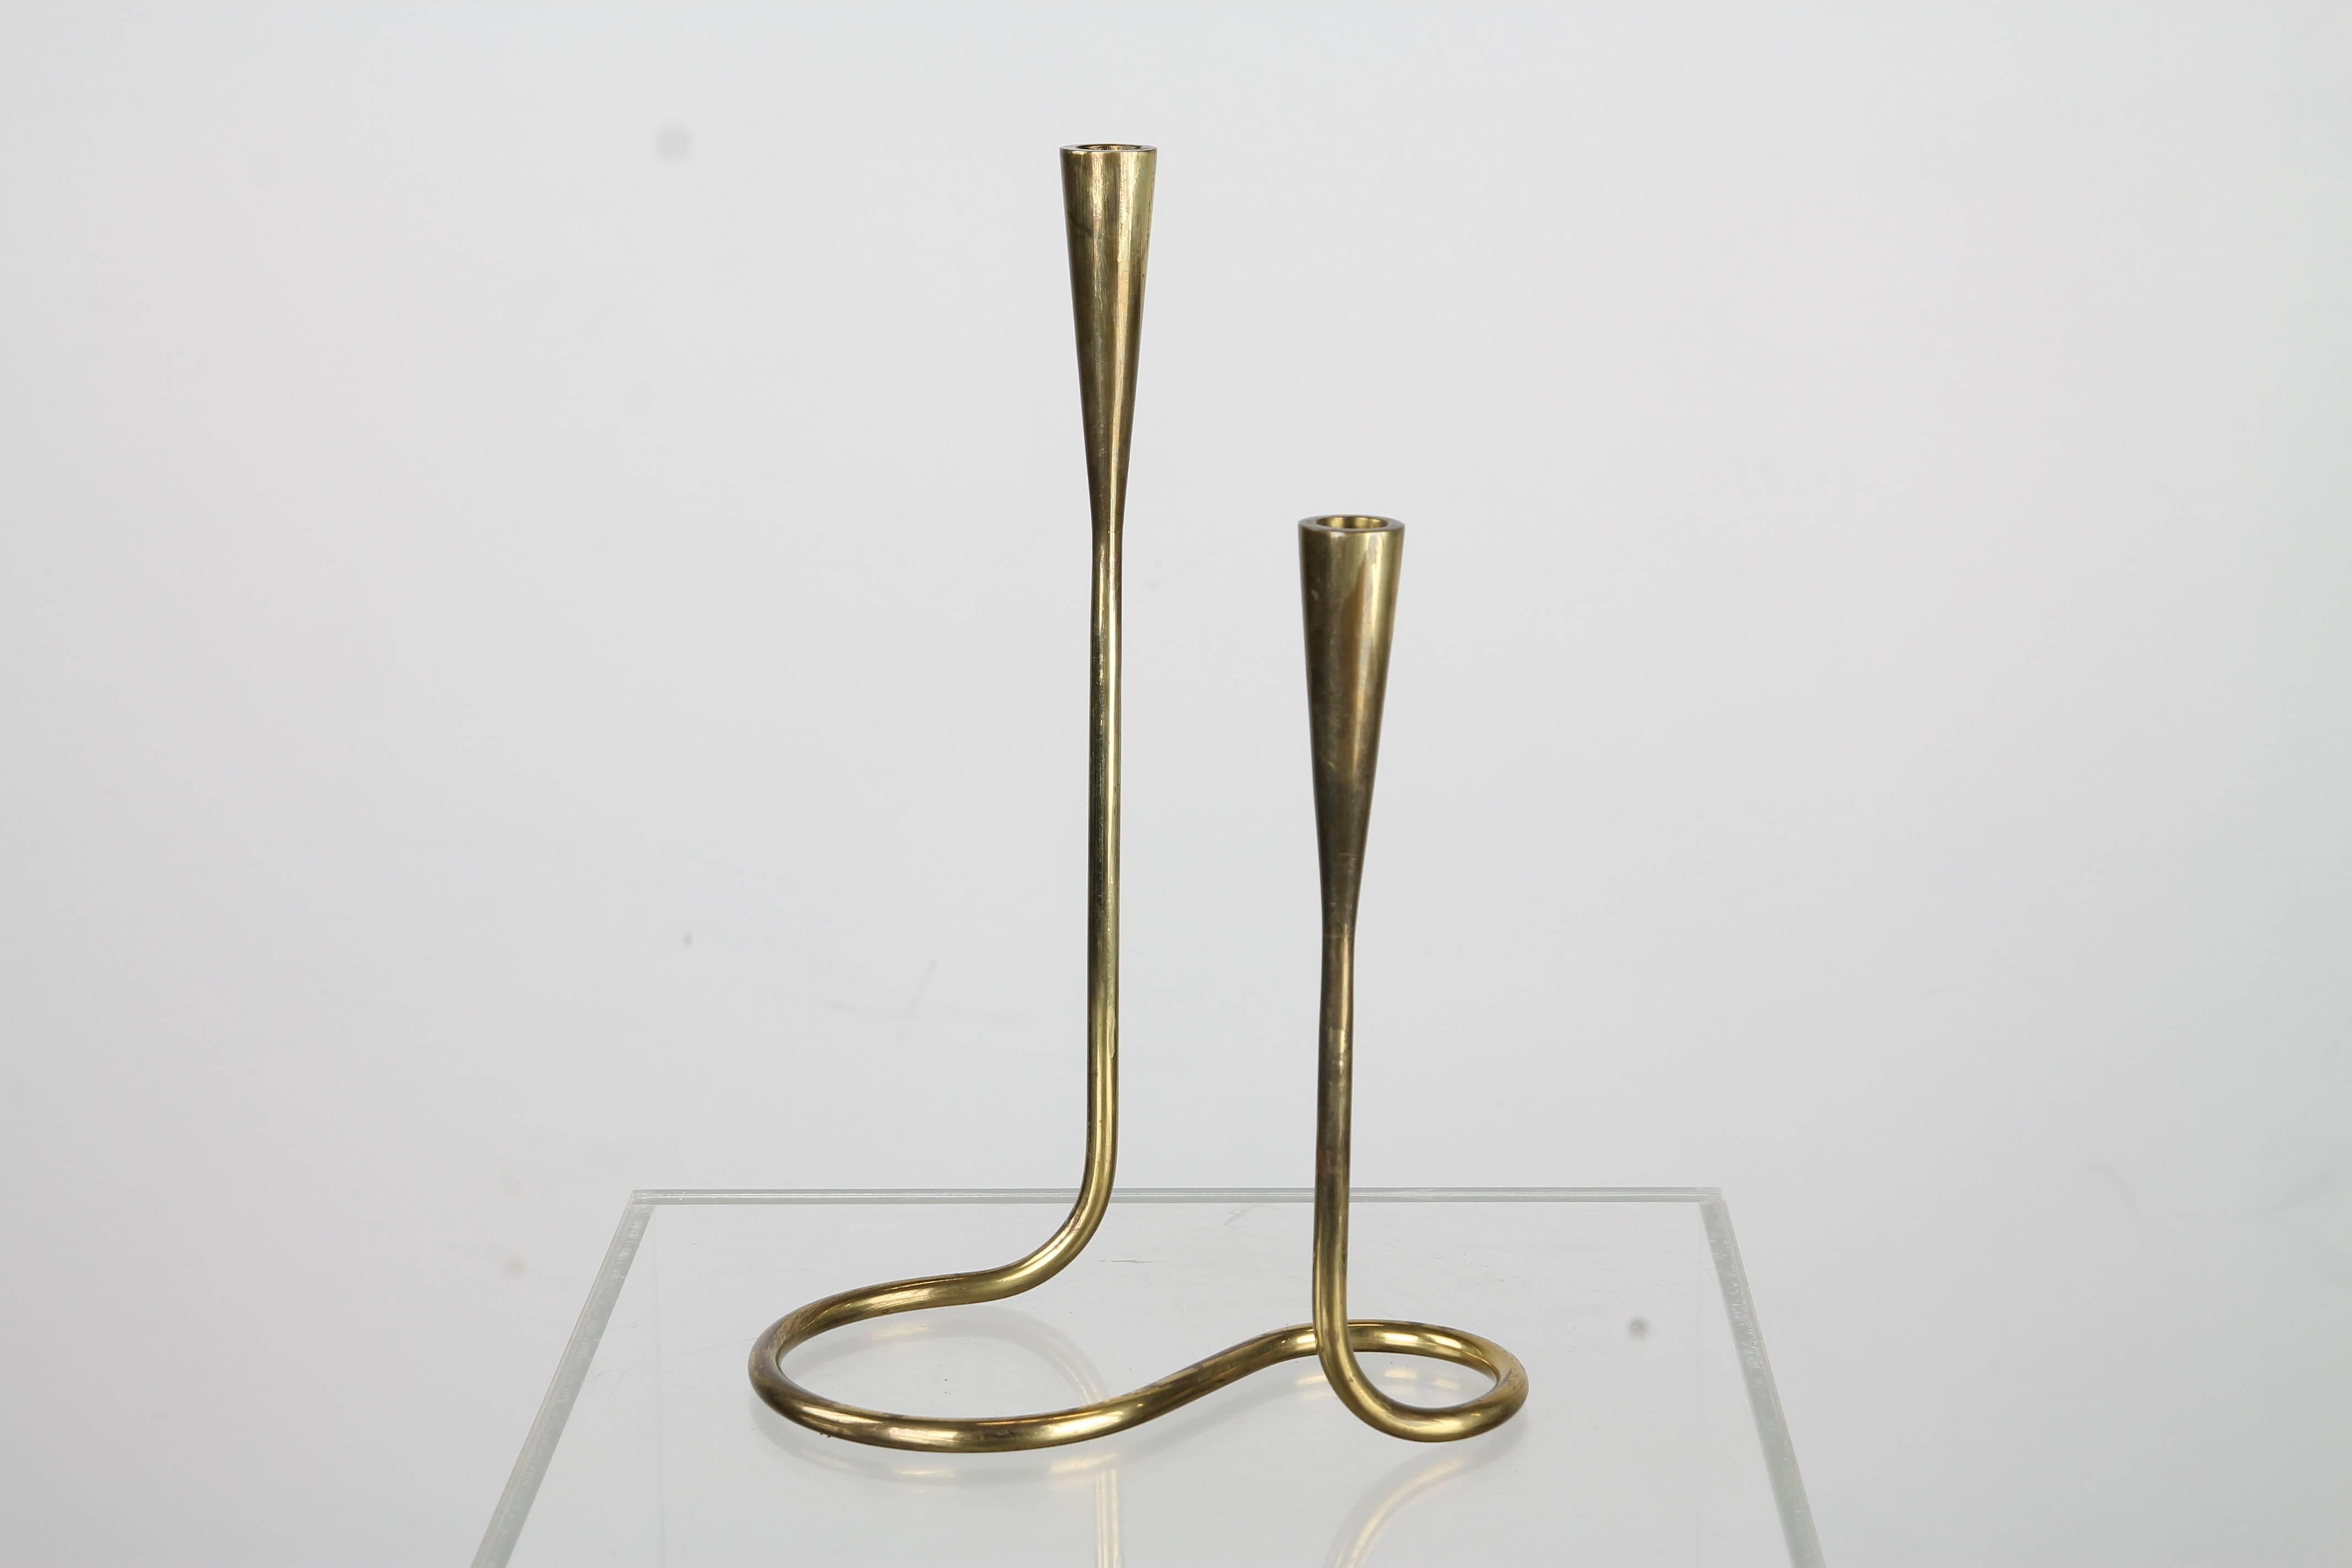 A pair of stunning serpentine-form candlesticks in solid brass by Illums Bolighus of Denmark, each having two holders for thin tapers at offset heights. Incised maker's mark on underside.